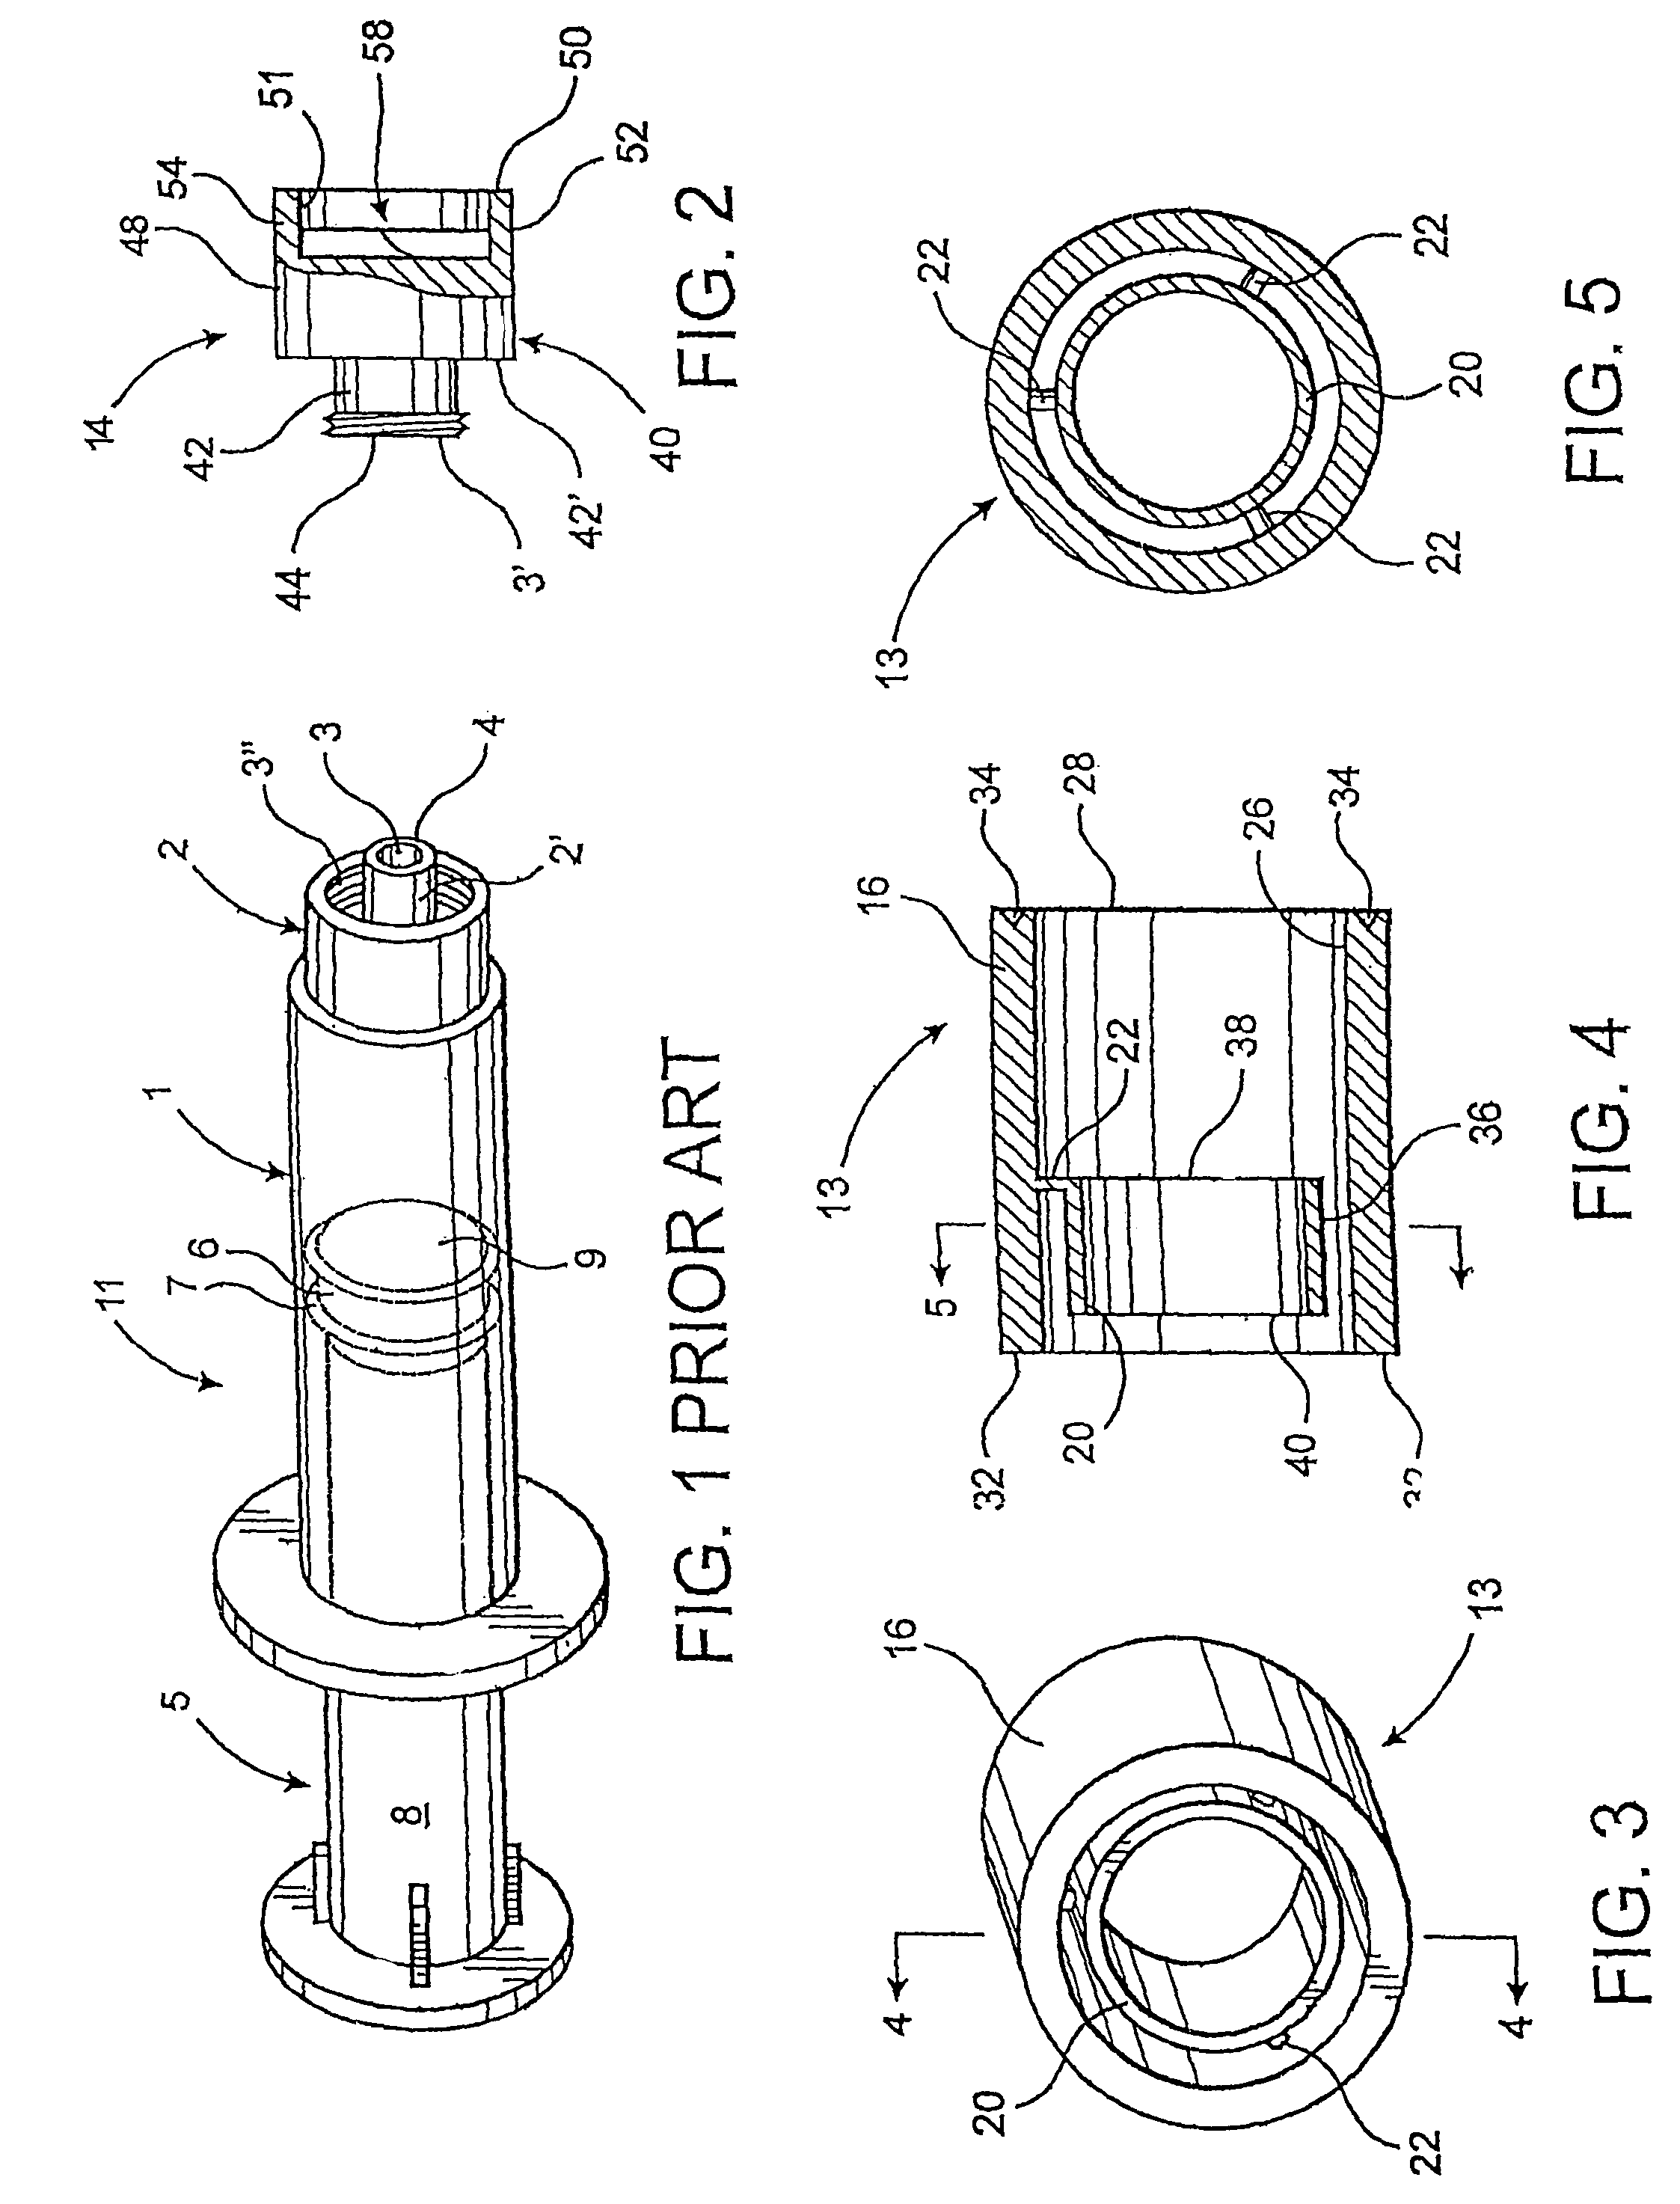 Tamper evident end cap assembly for a loaded syringe and process